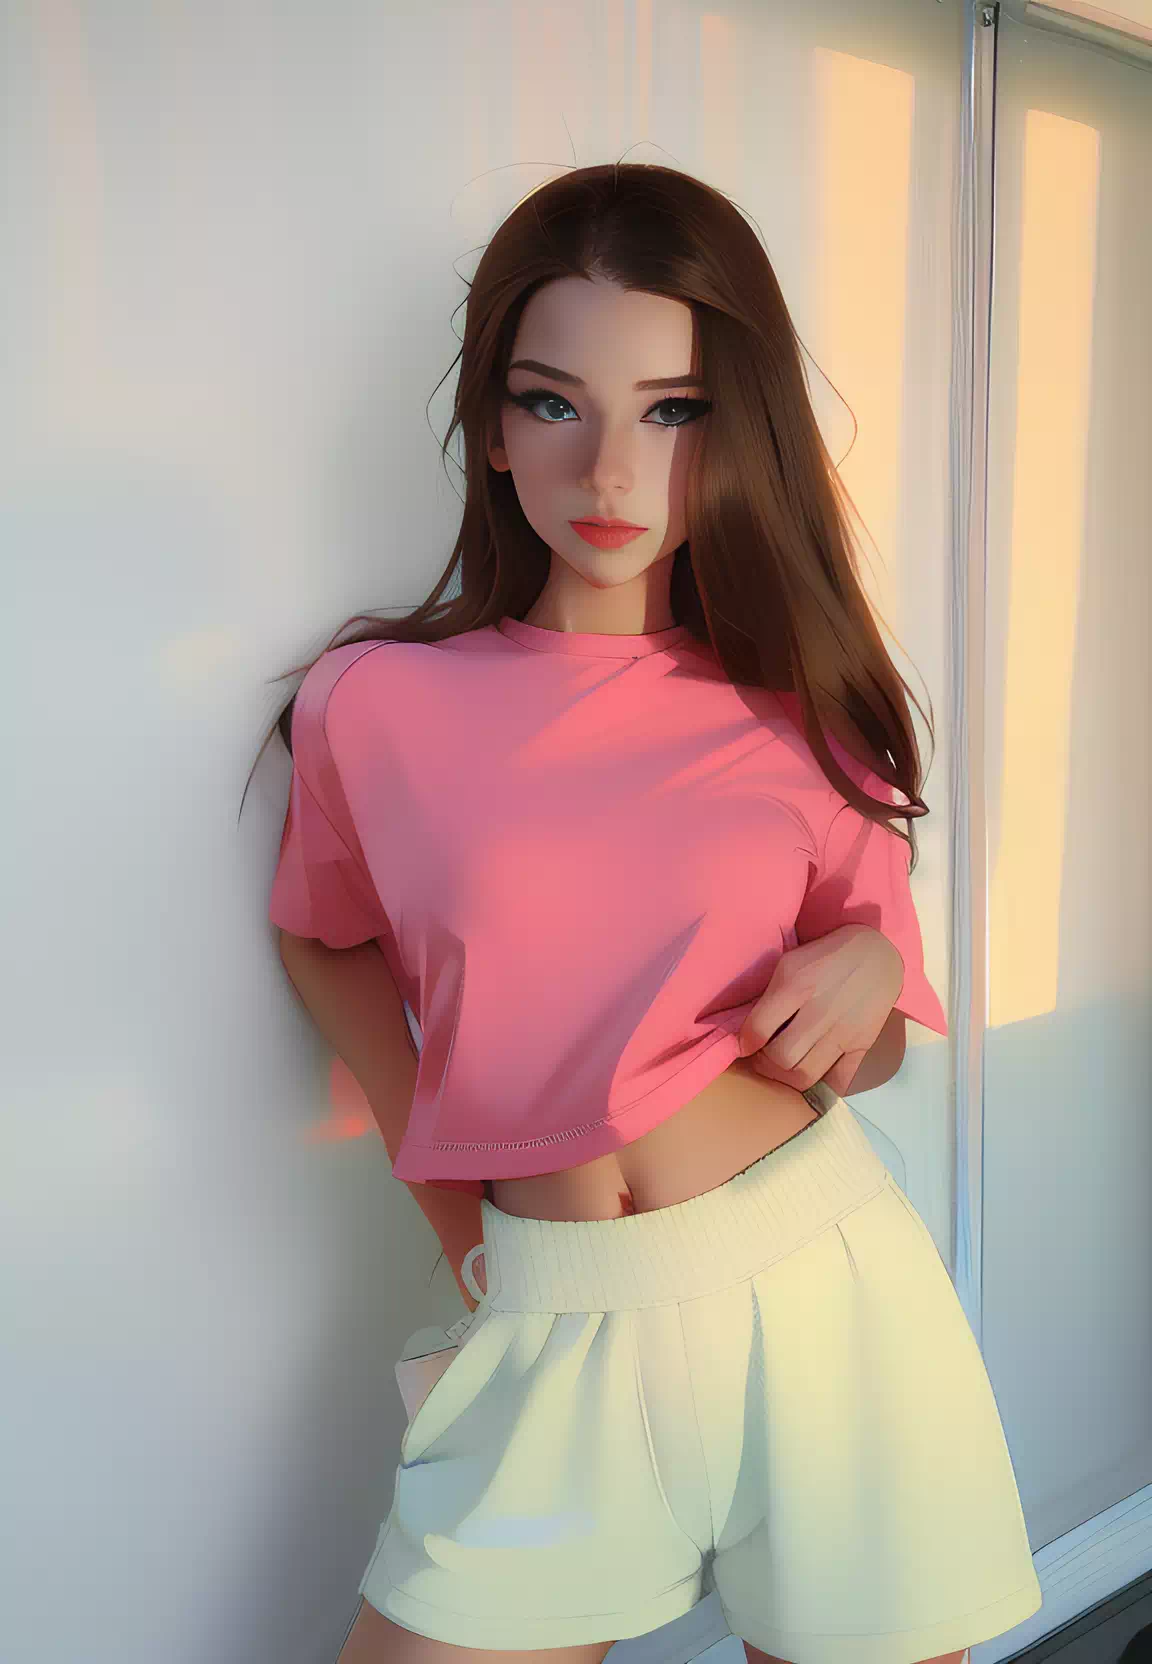 girl in pink top